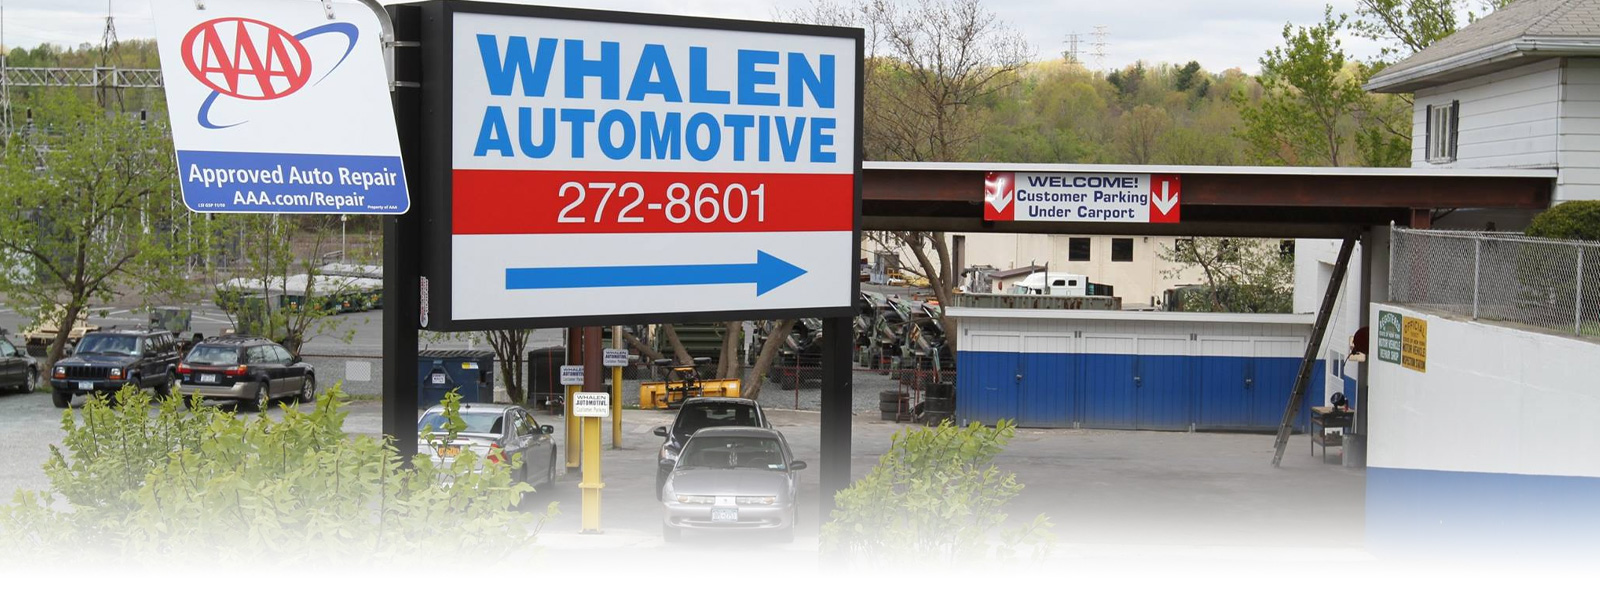 Whalen Automotive is a trusted, AAA-Approved automotive service and repair facility, serving the Latham and Watervliet communities since 1990.